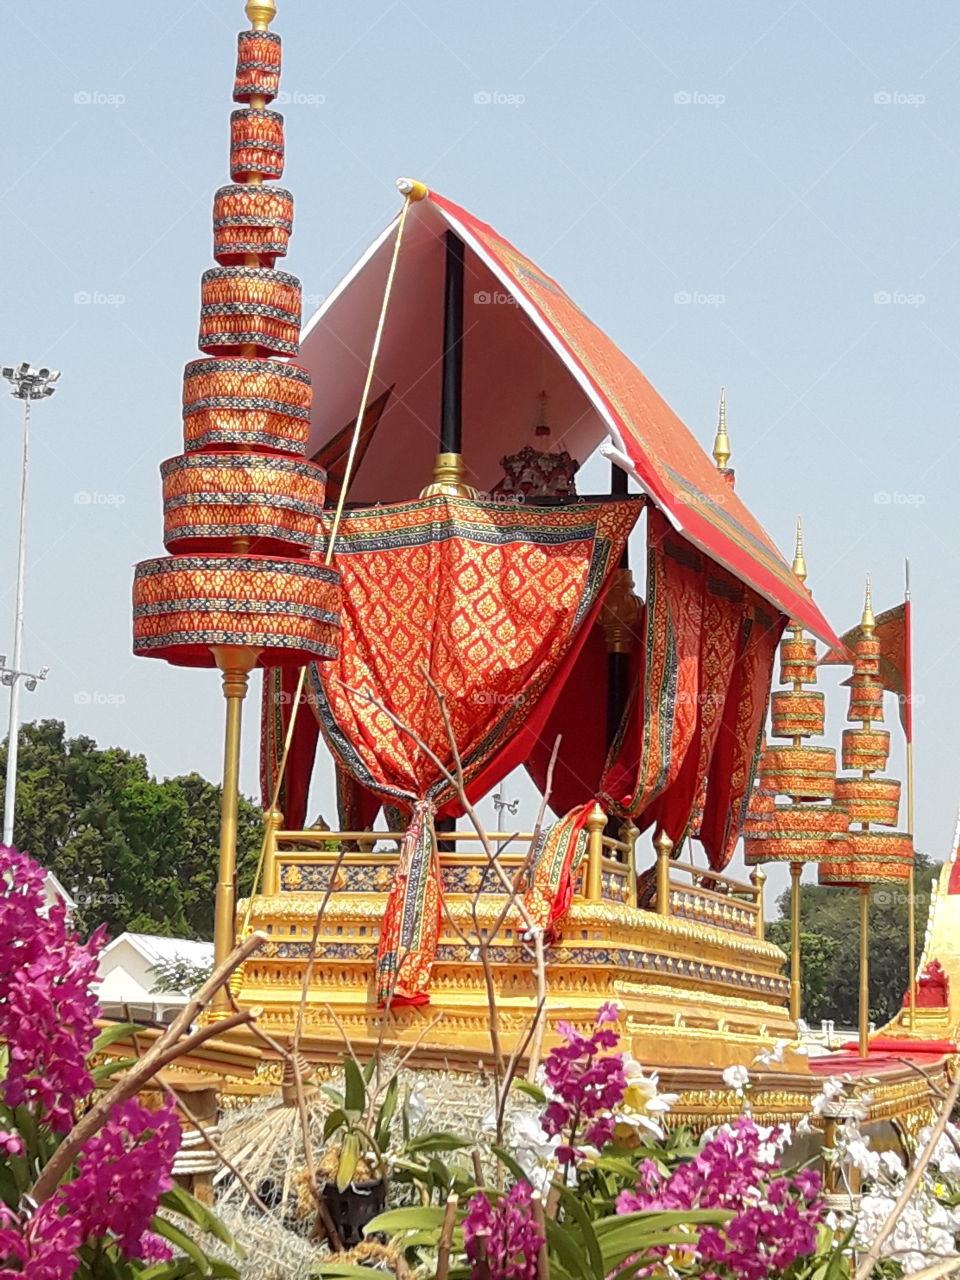 thai pavillion ; the beauty of thaiart cloth and seven tiered umbrella ; the equisite of thaicraft.  Identity of the art of Thailand.